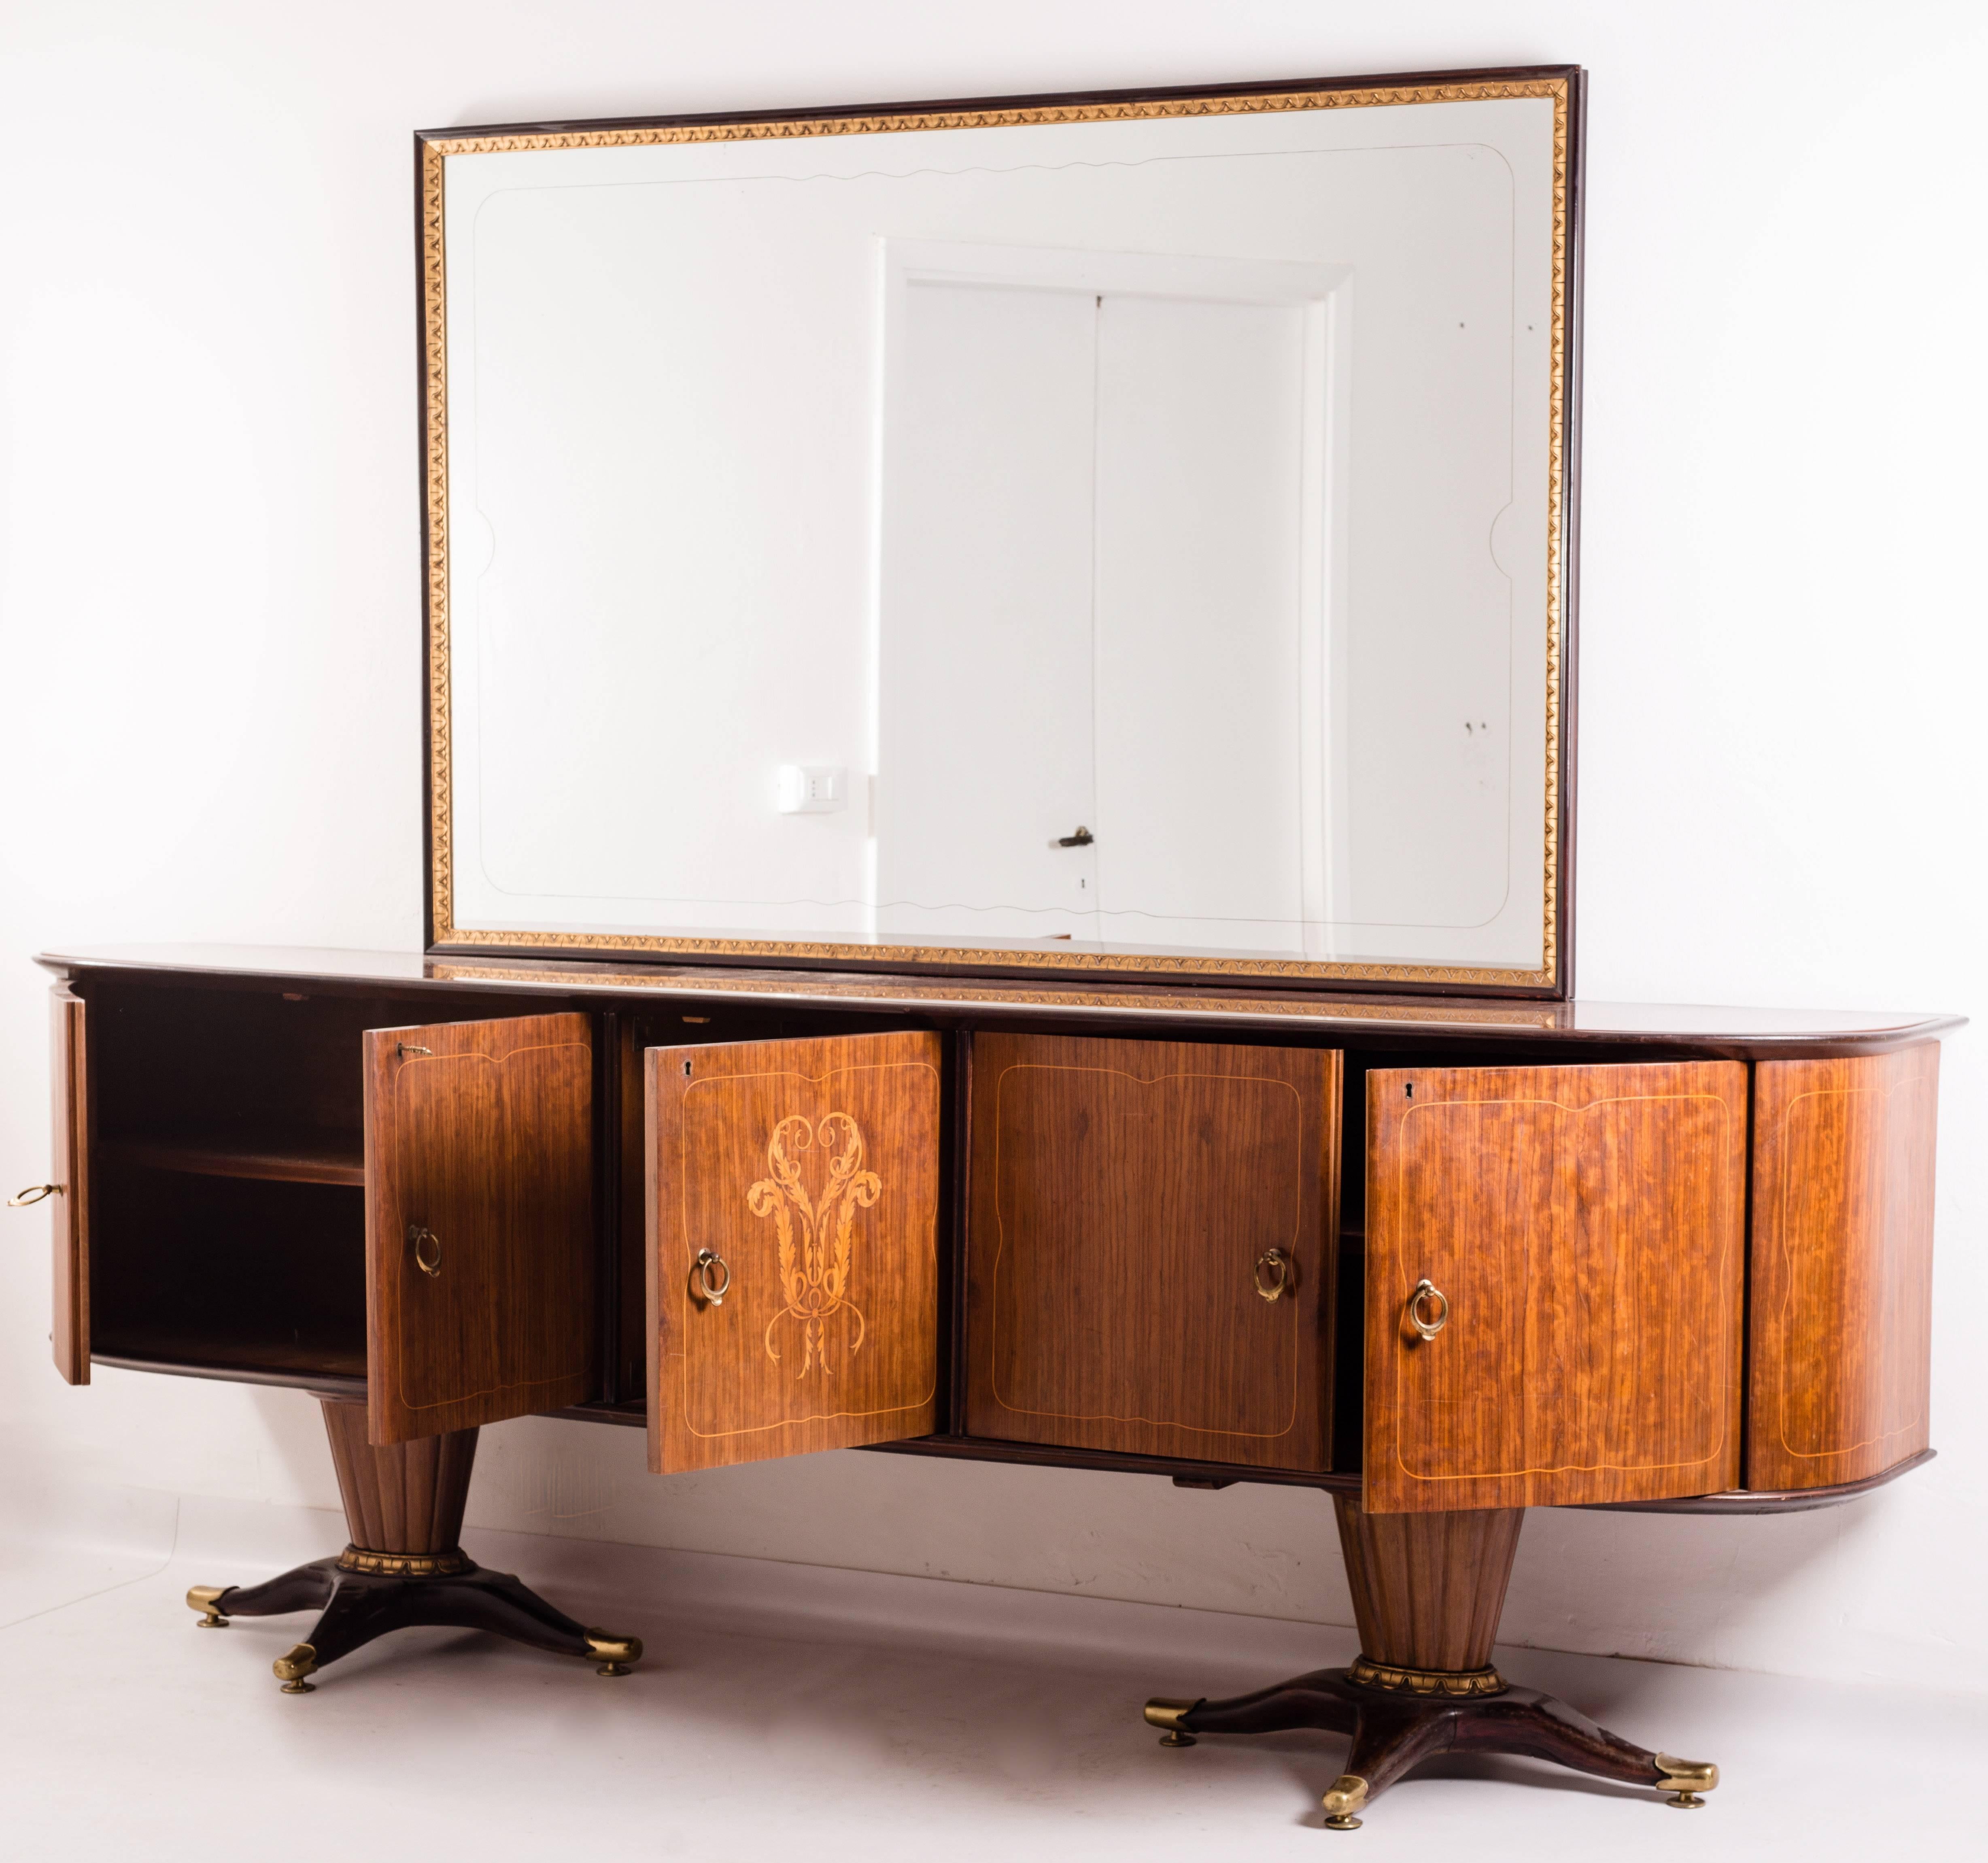 Italian Mid-Century Sideboard with Mirror by  Paolo Buffa, 1950s For Sale 1